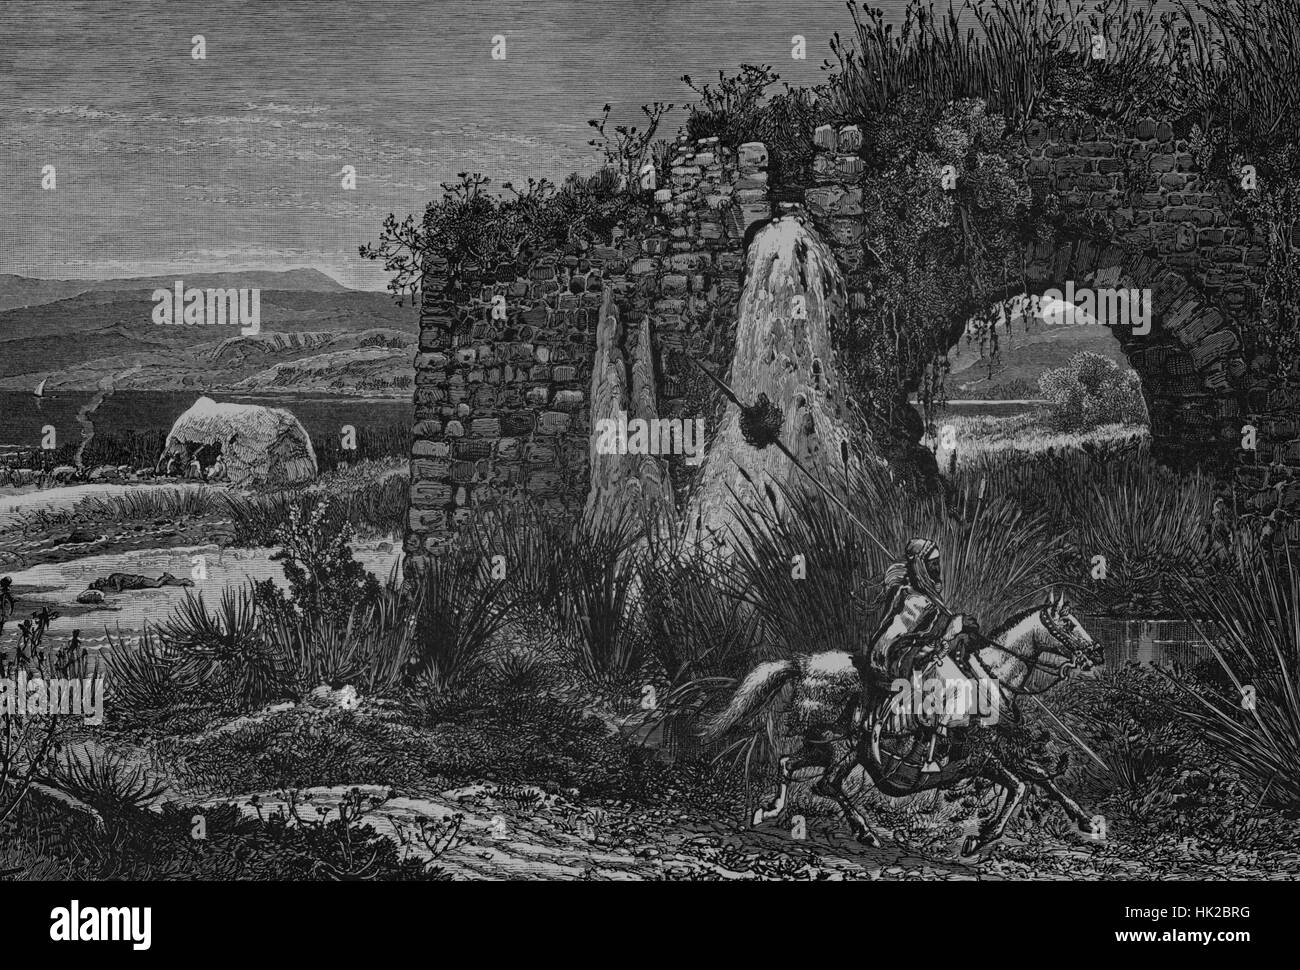 An engraving showing the landscape surrounding a portion of the Sea of Galilee at the supposed site of Bethsaida, which is a biblical location from the New Testament, Israel, 1882. From the New York Public Library. Stock Photo